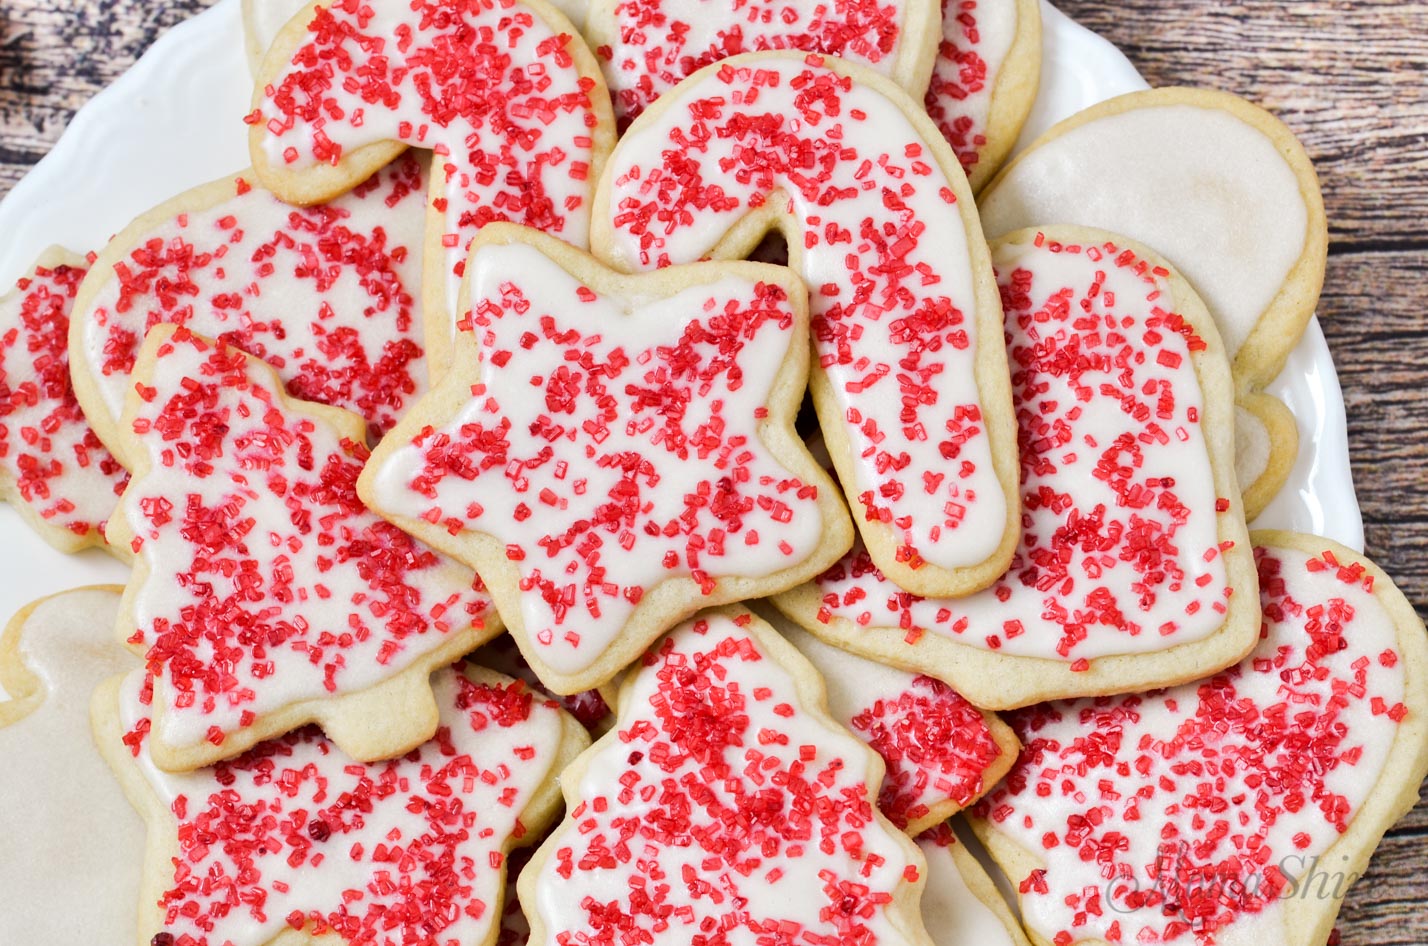 Christmas cut-out cookies made with a gluten-free vanilla sugar cookie recipe.